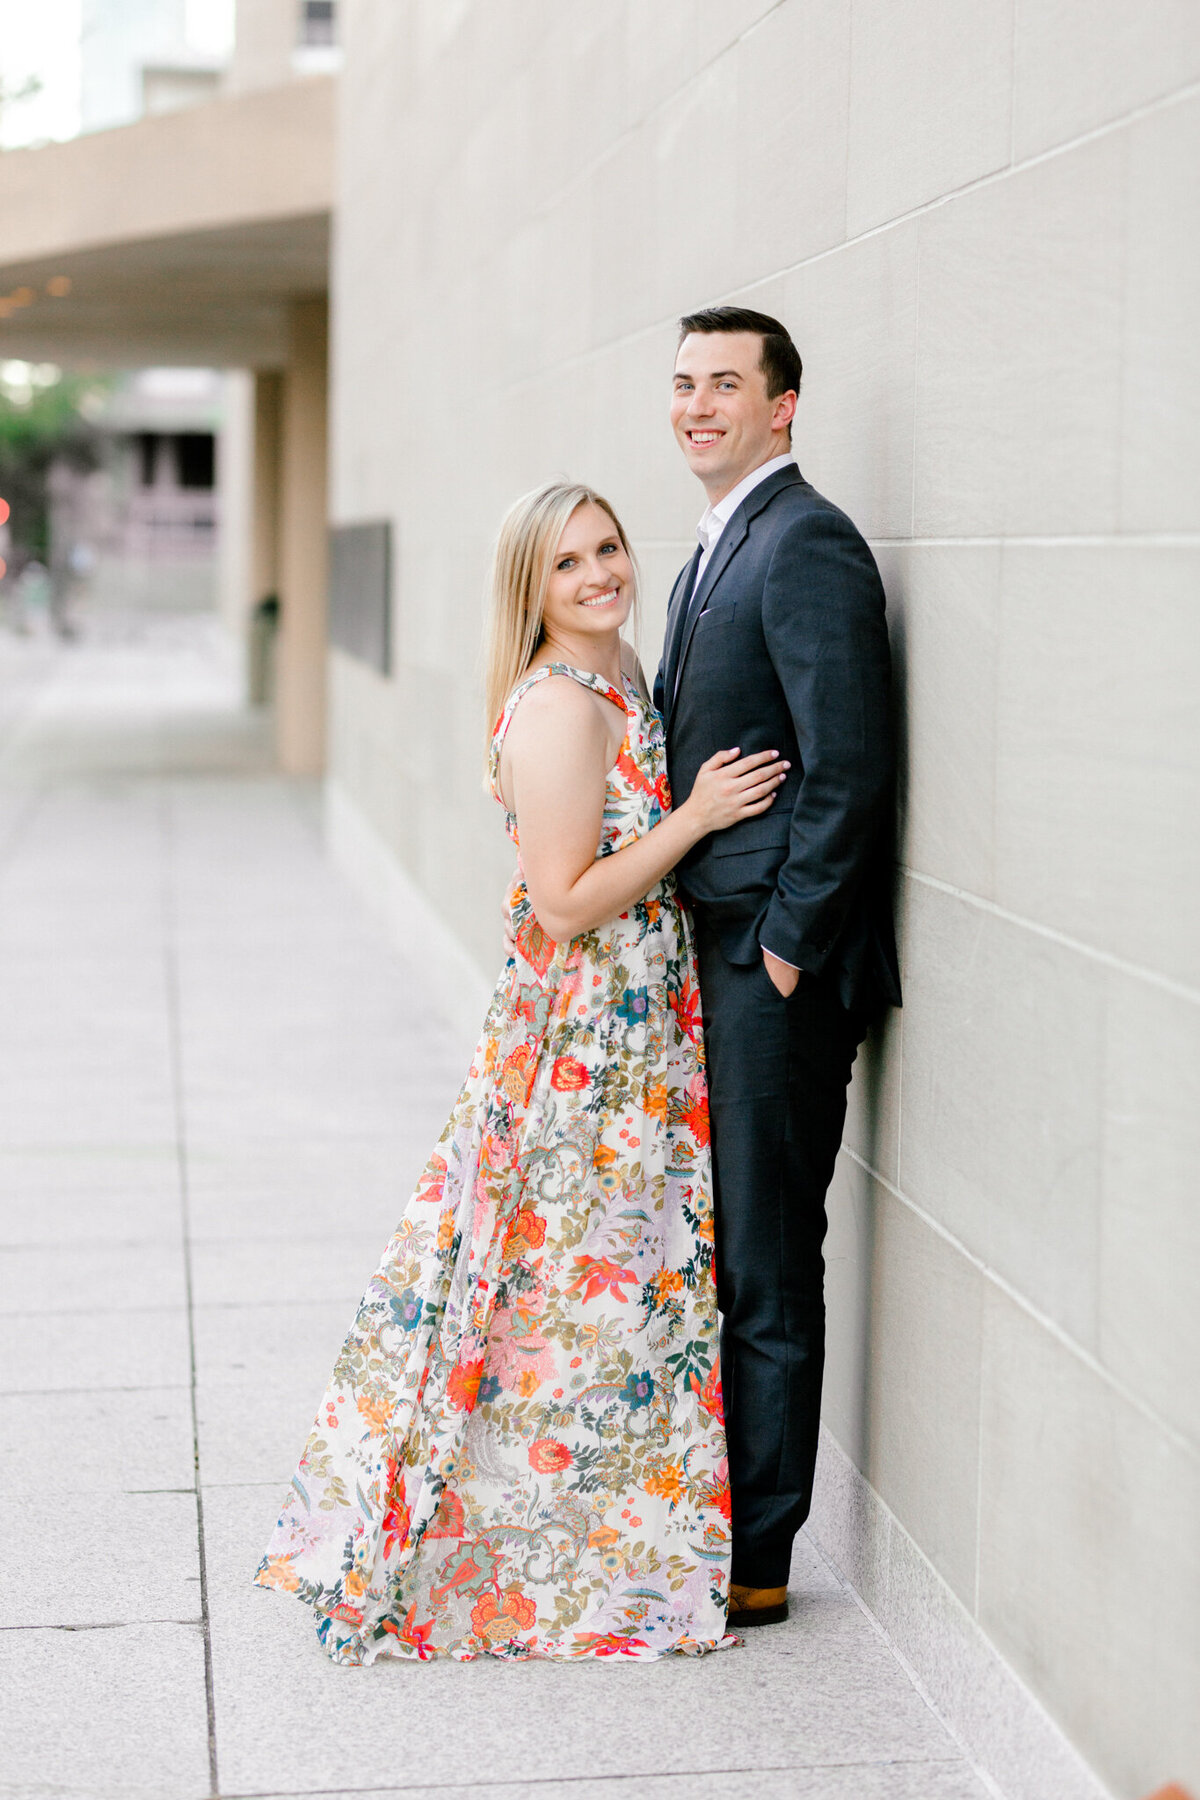 Montanna & KC Engagement Session at the Dallas Arts District | DFW Wedding Photographer | Sami Kathryn Photography-1